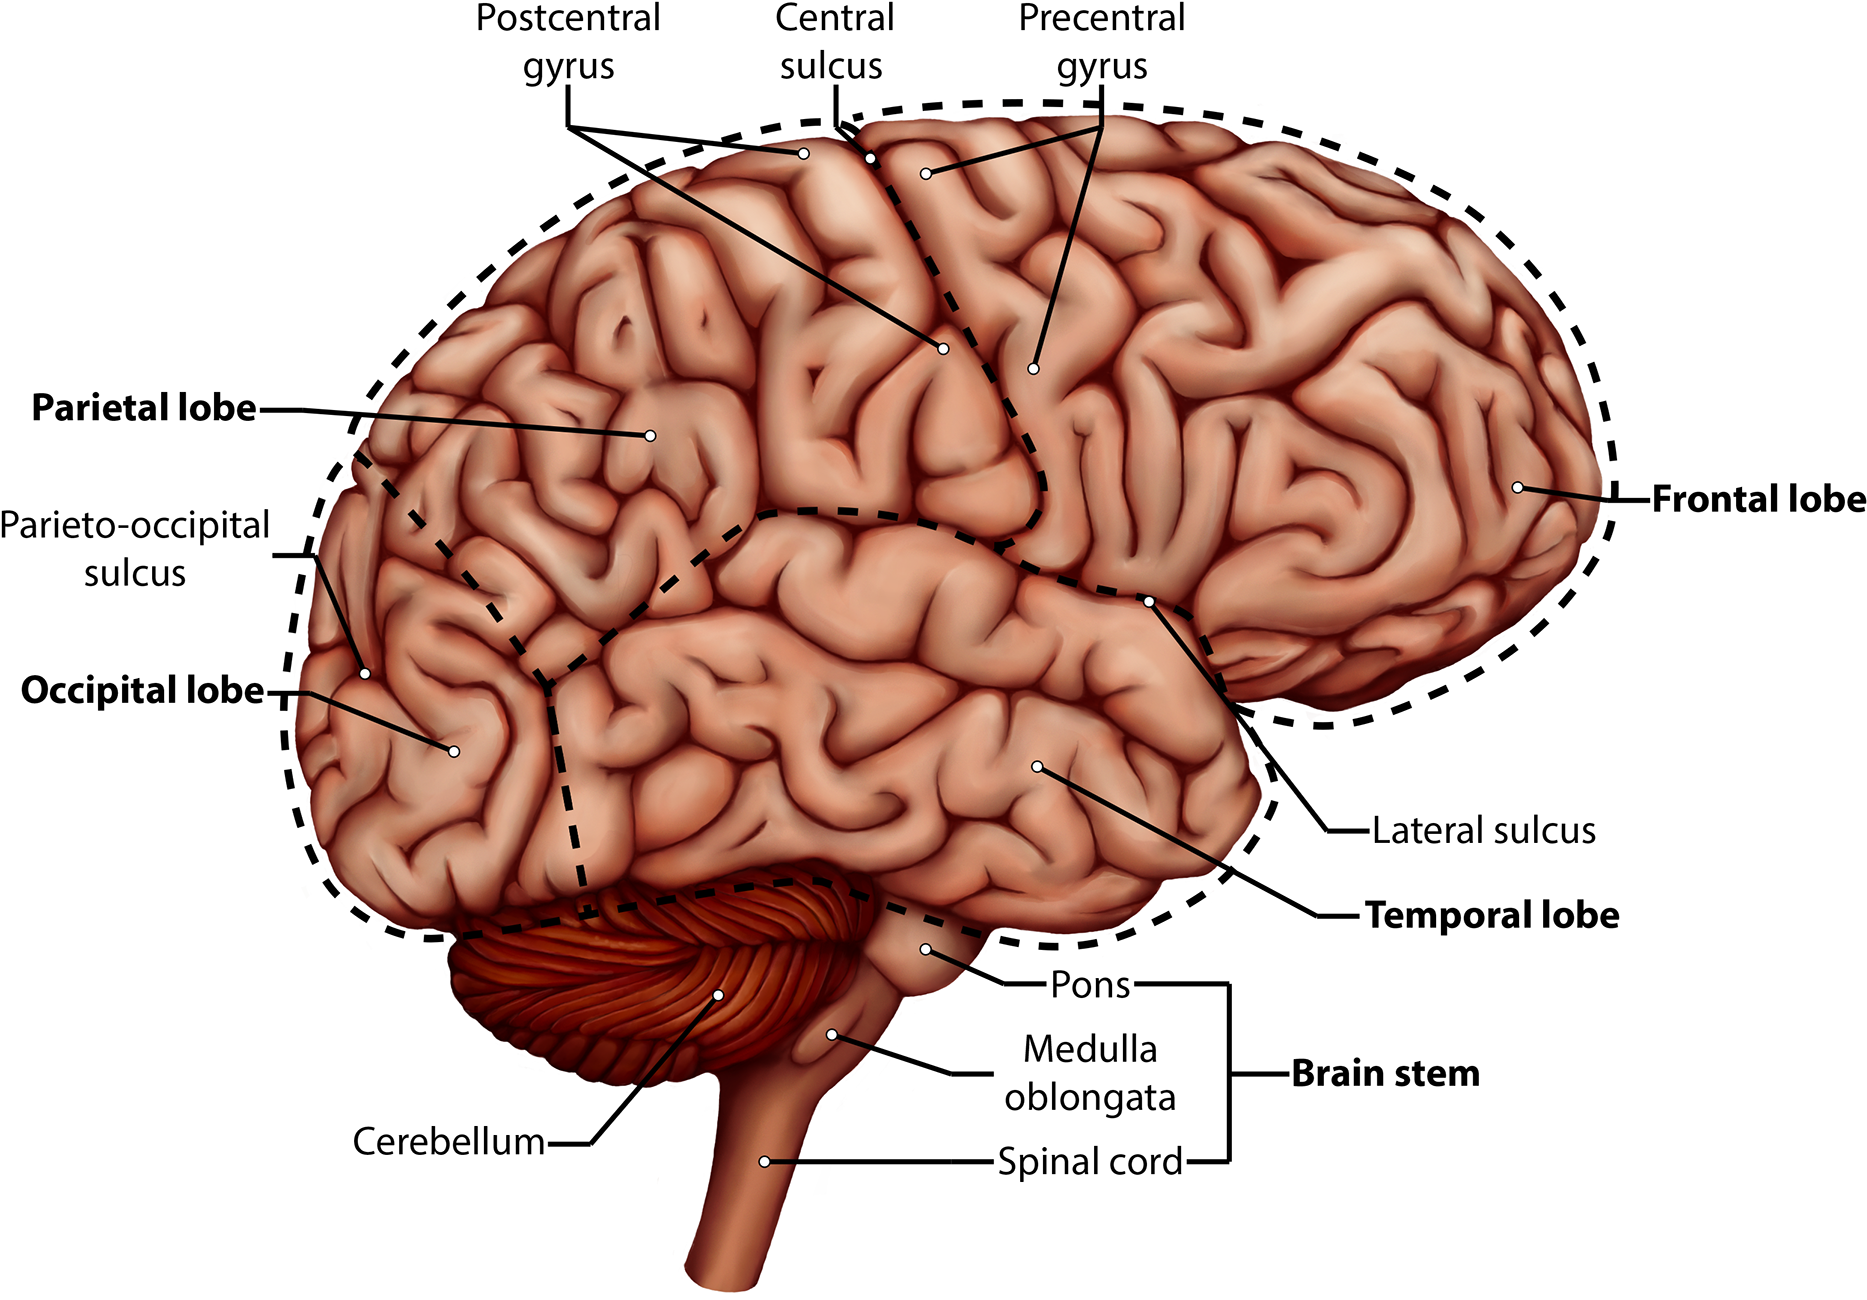 Side View And Sagittal Cuts Of The Human Brain And - Brain (1920x1325)